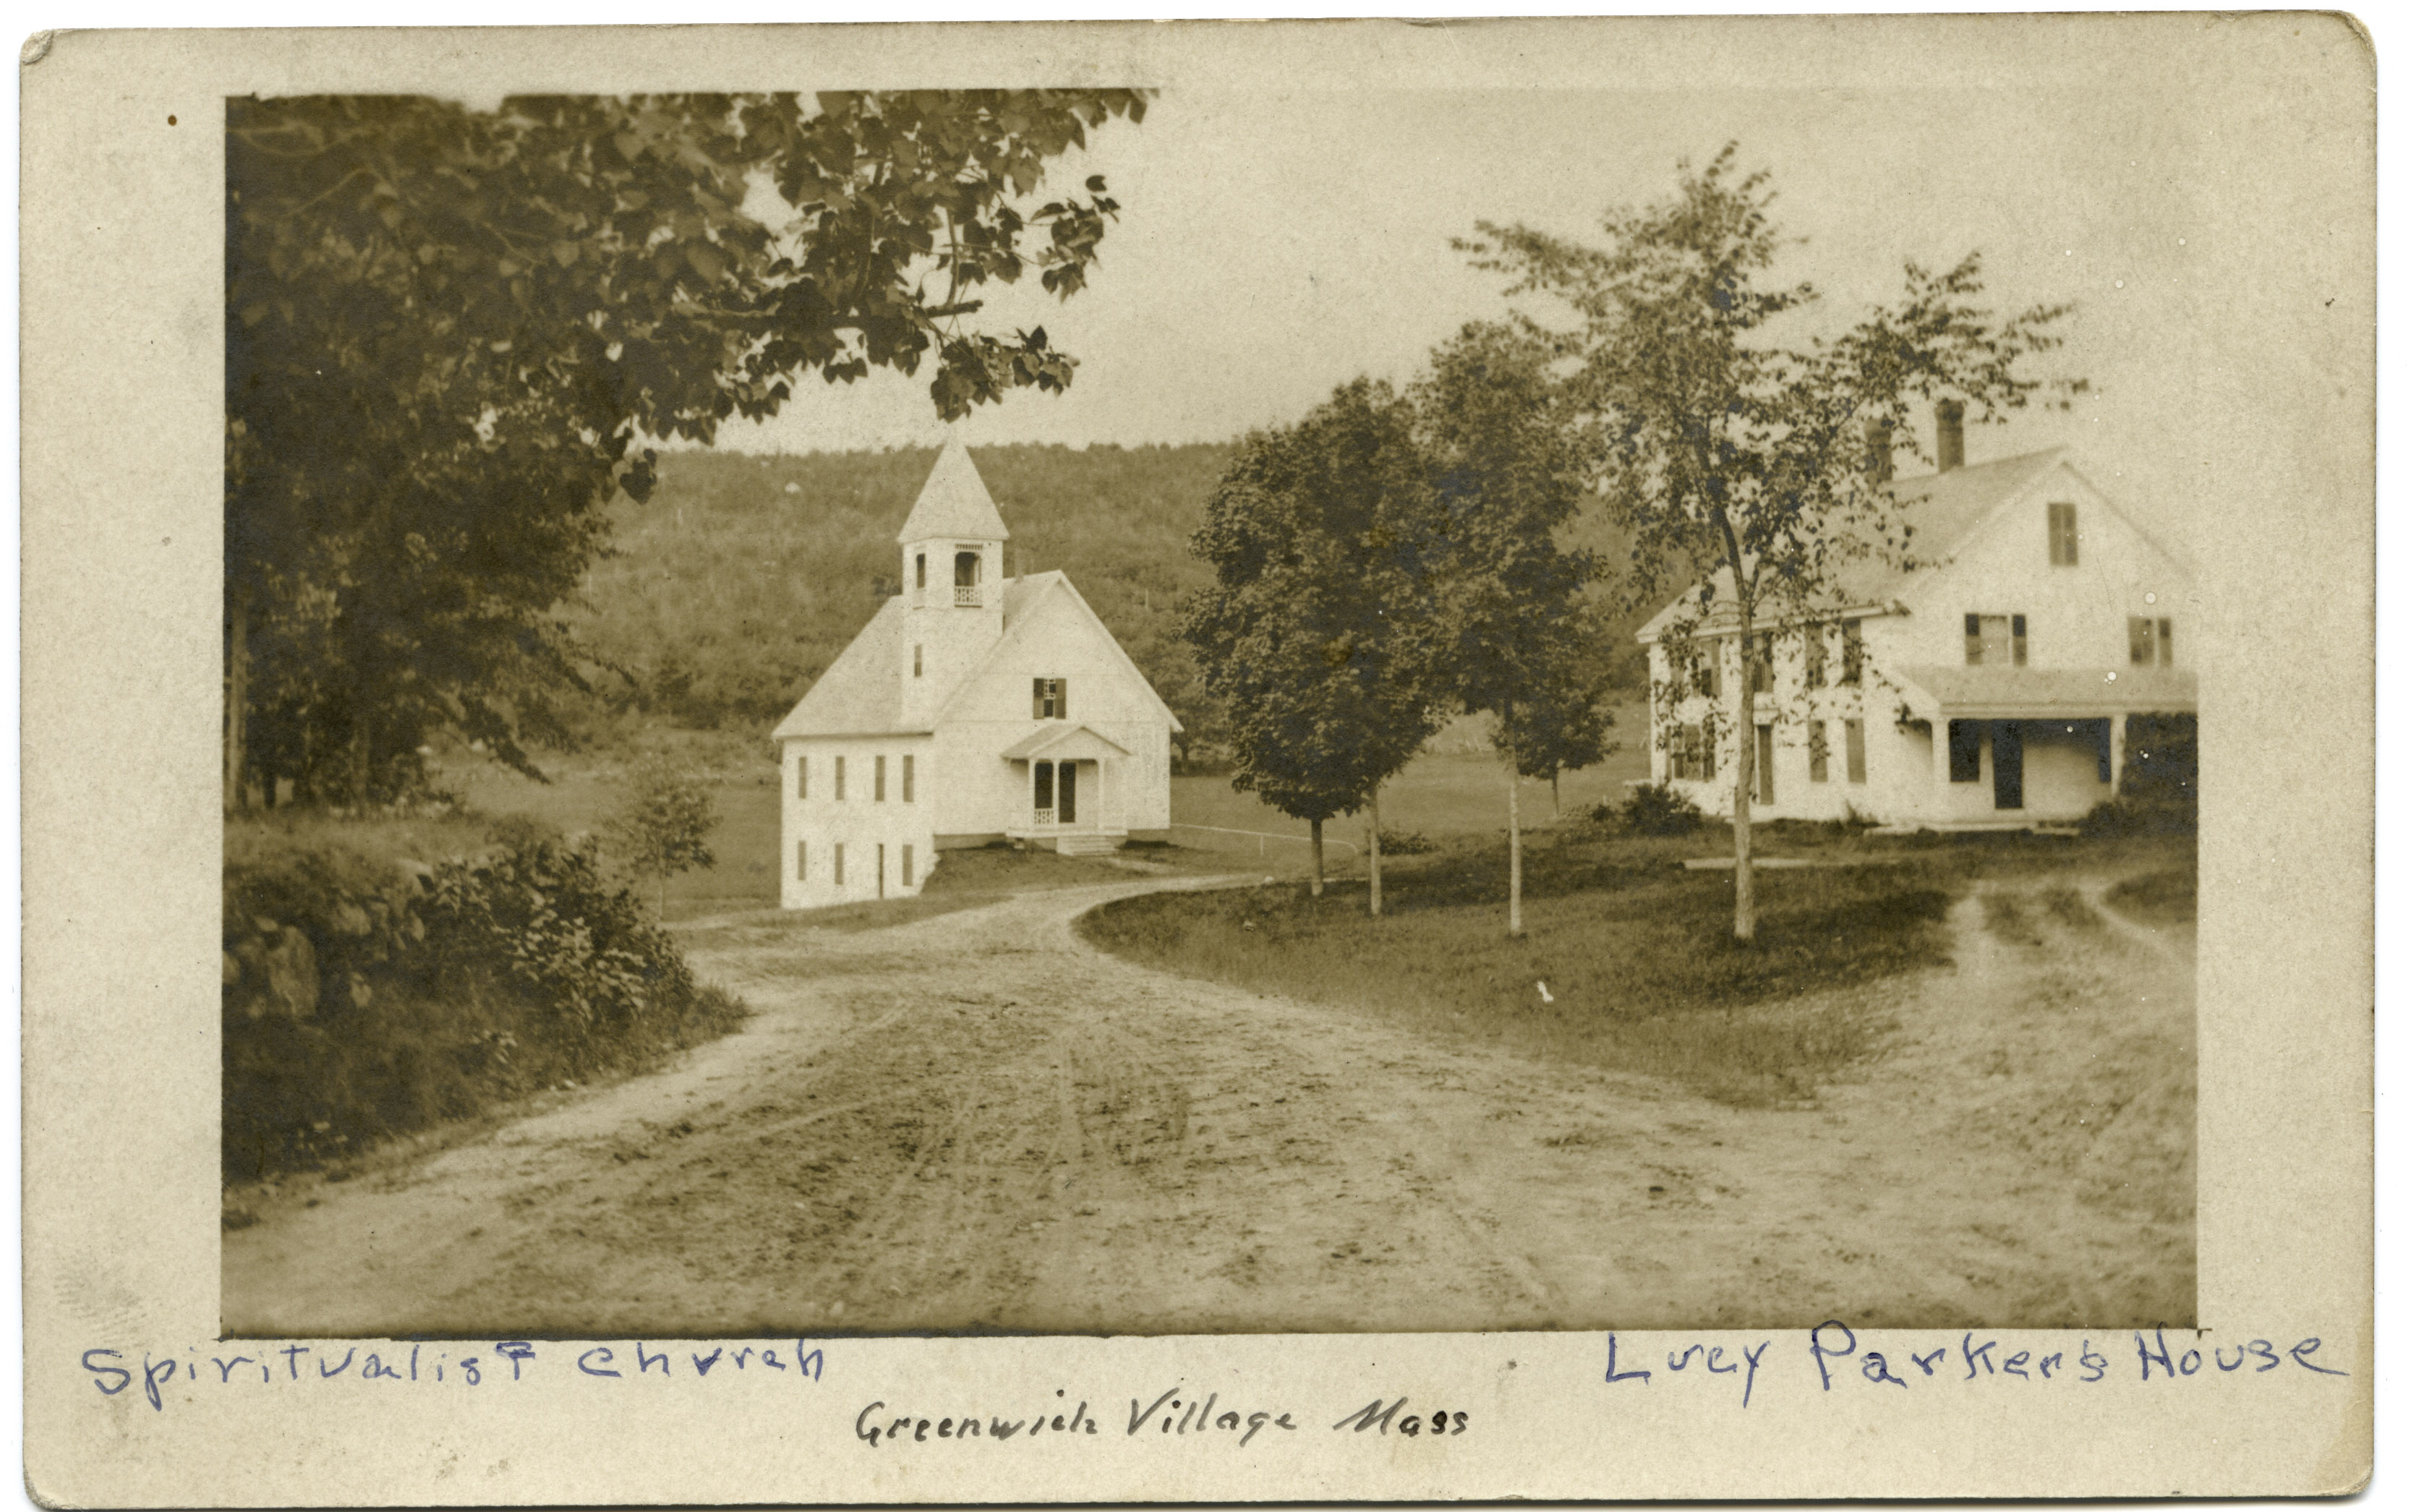 Depiction of Spiritualist Church and Lucy Parker's house, ca.1908